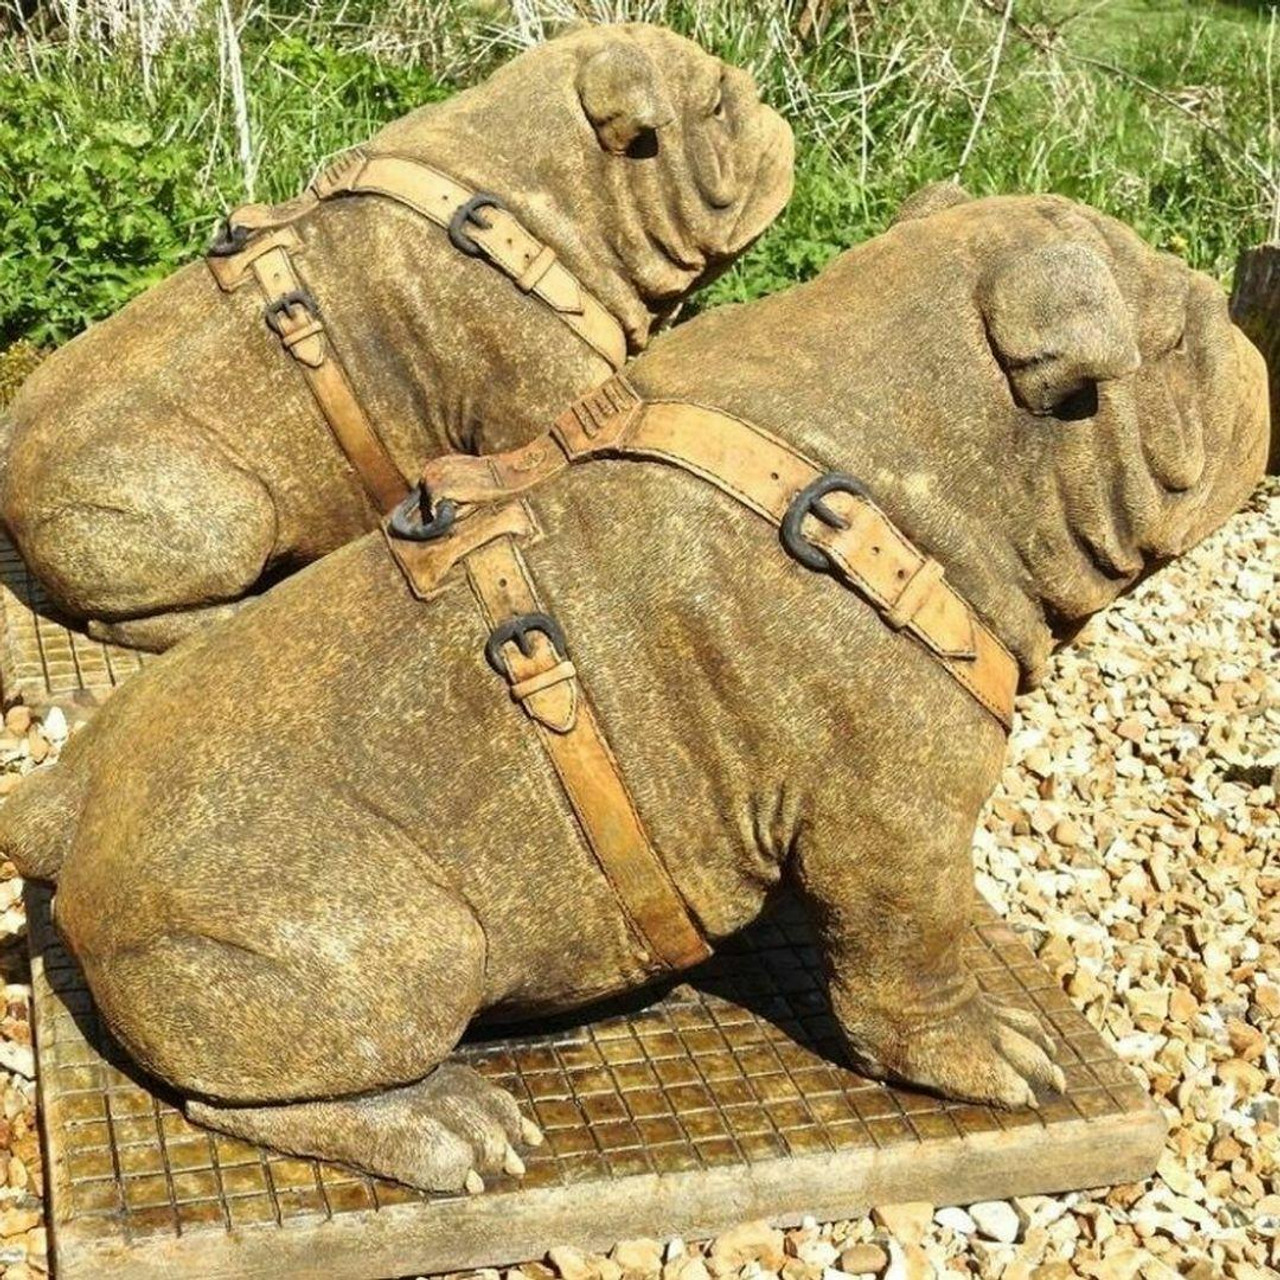 EXCLUSIVE Pair Life Size Sitting British Bulldogs Ornament Statue Hand Made in UK